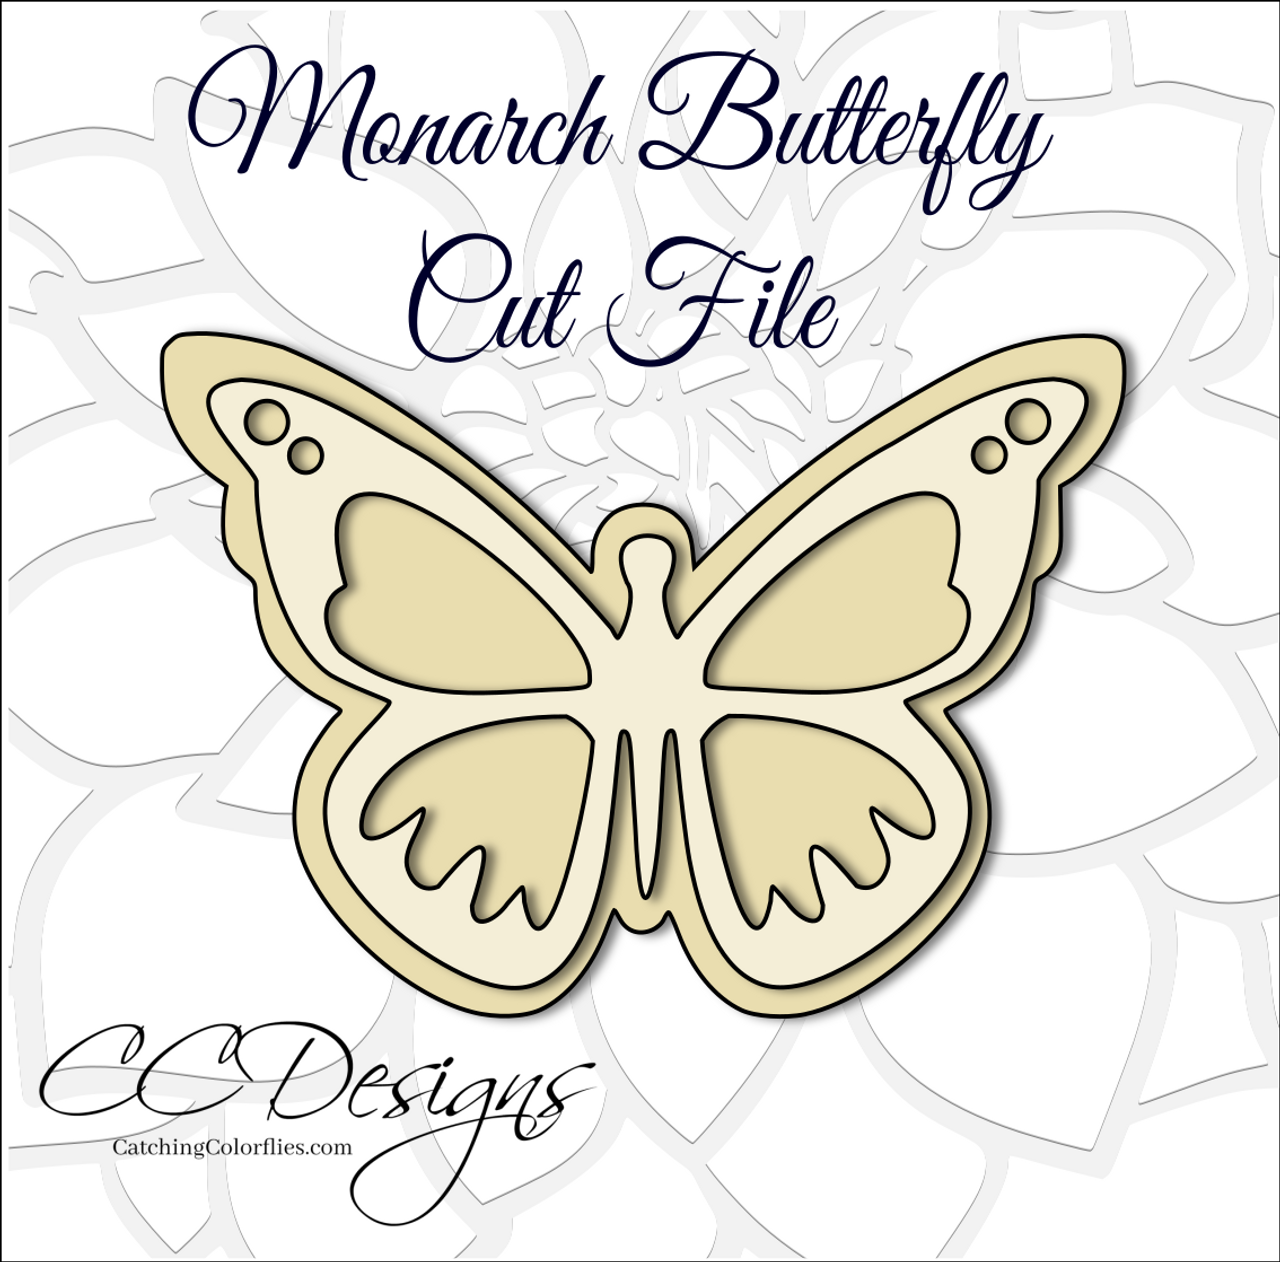 Download Monarch Butterfly Svg Cut File And Pdf Template Catching Colorflies